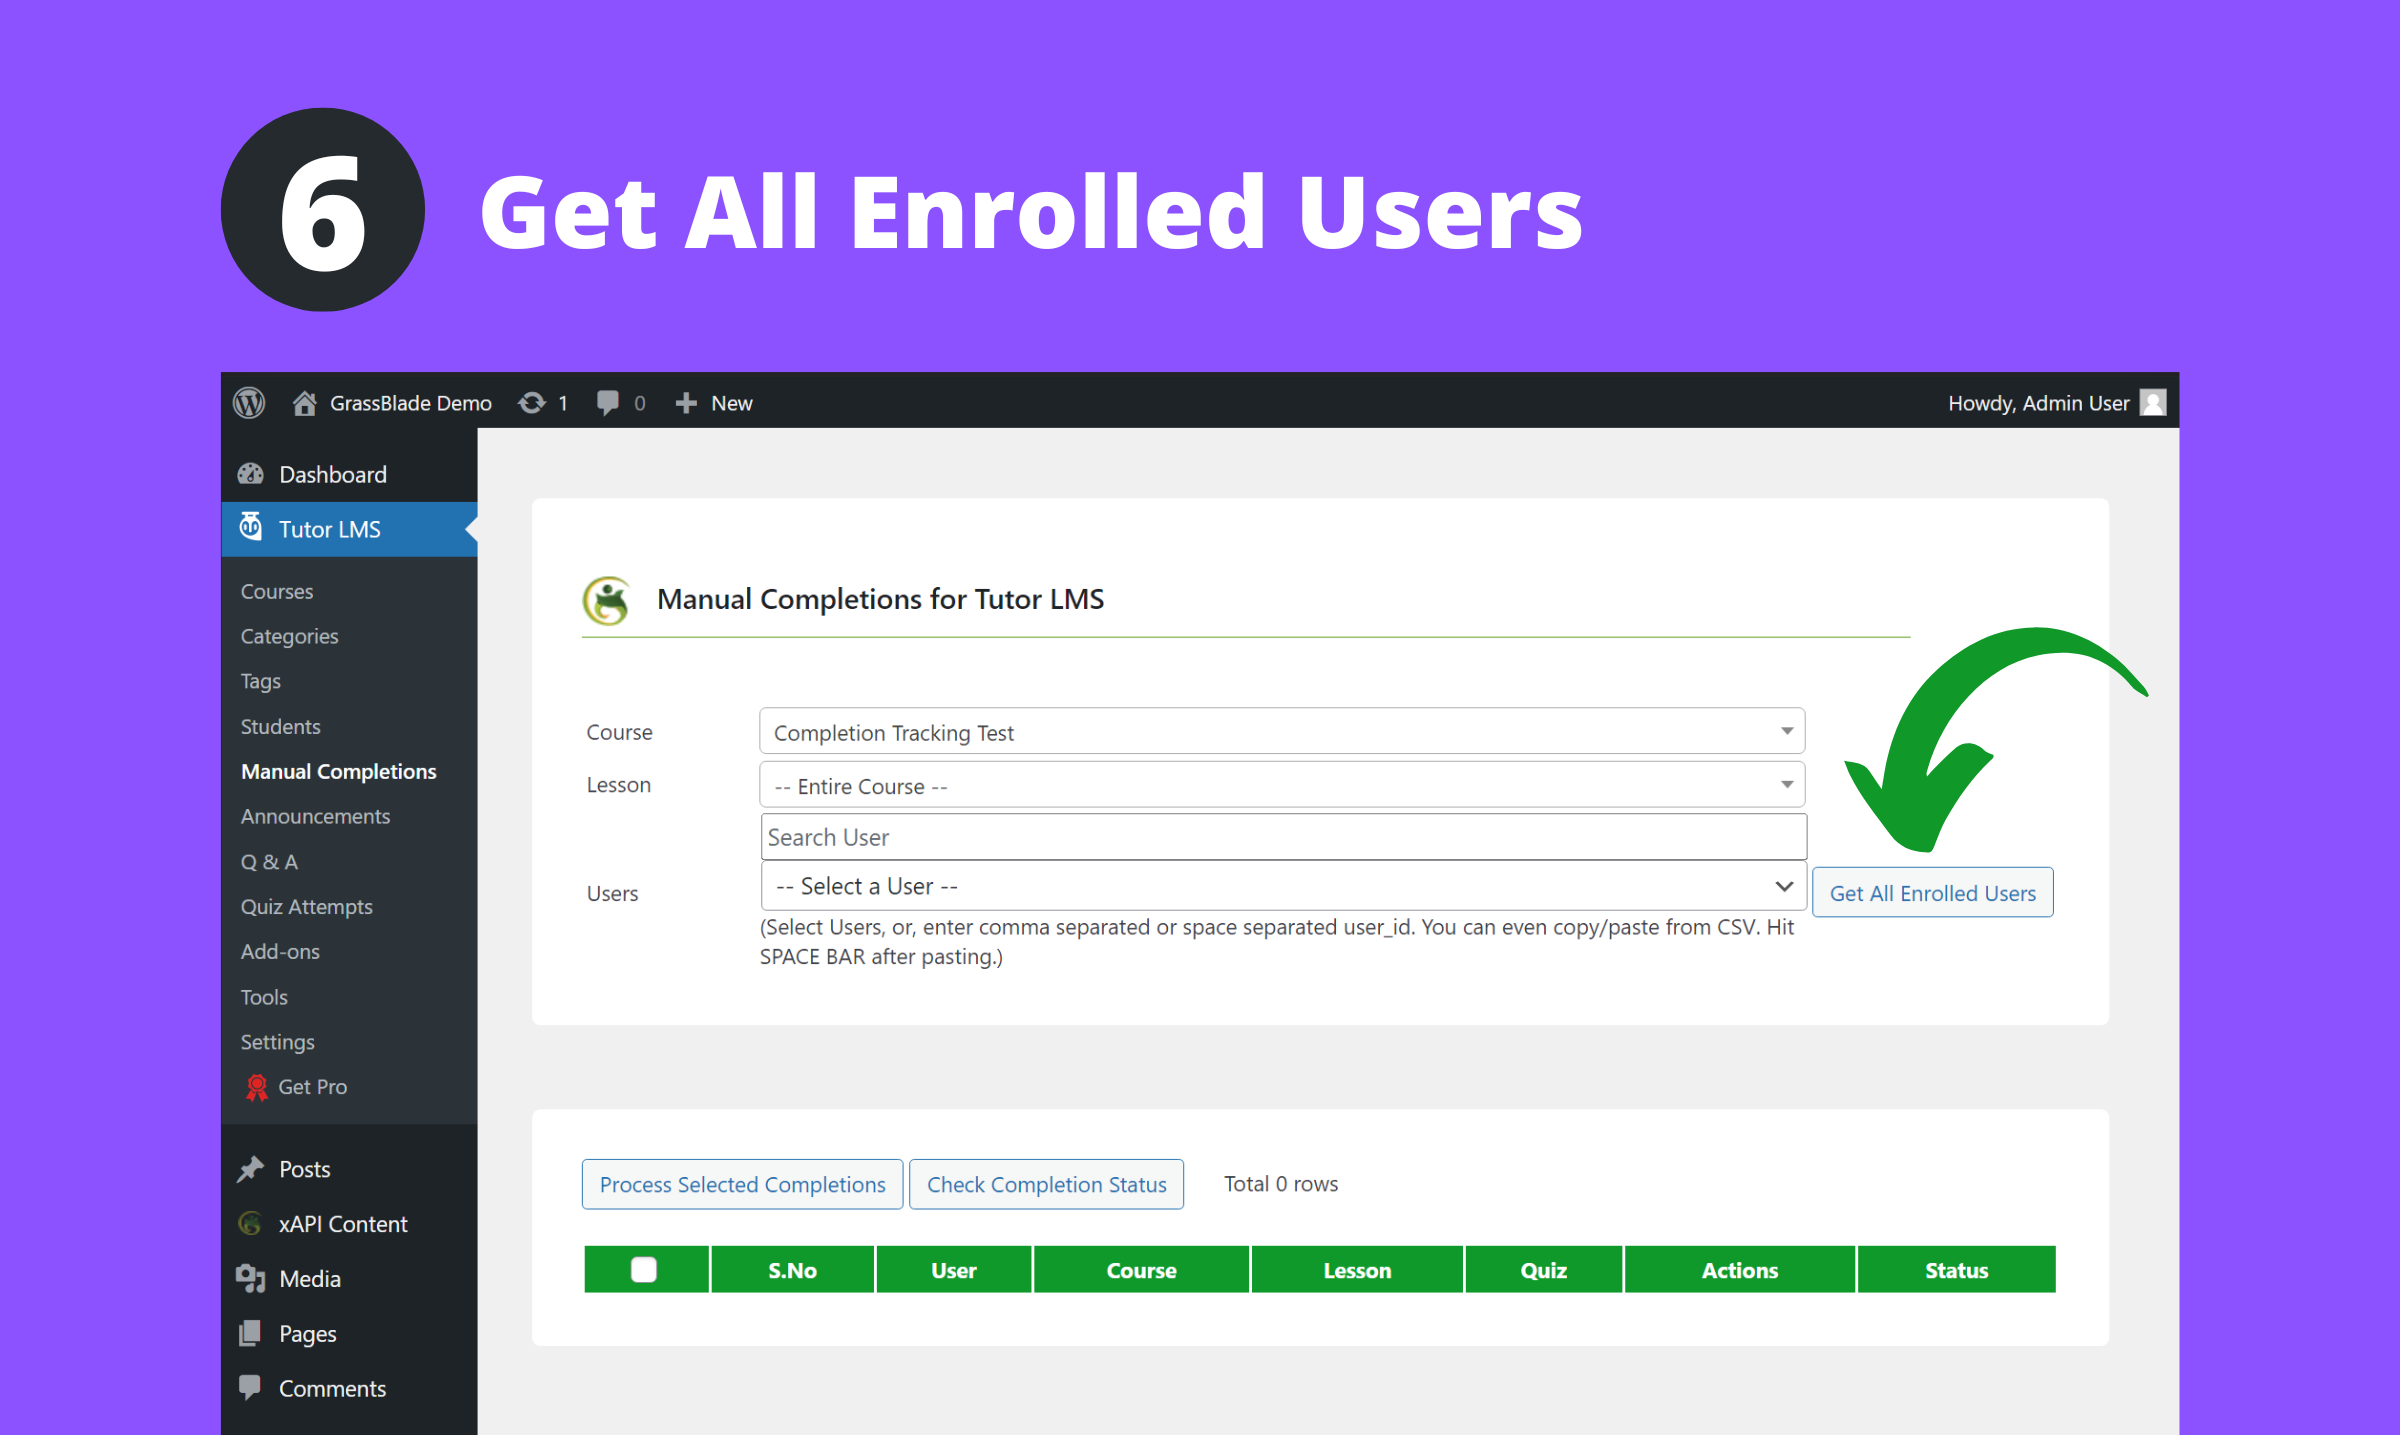 Get all enrolled users